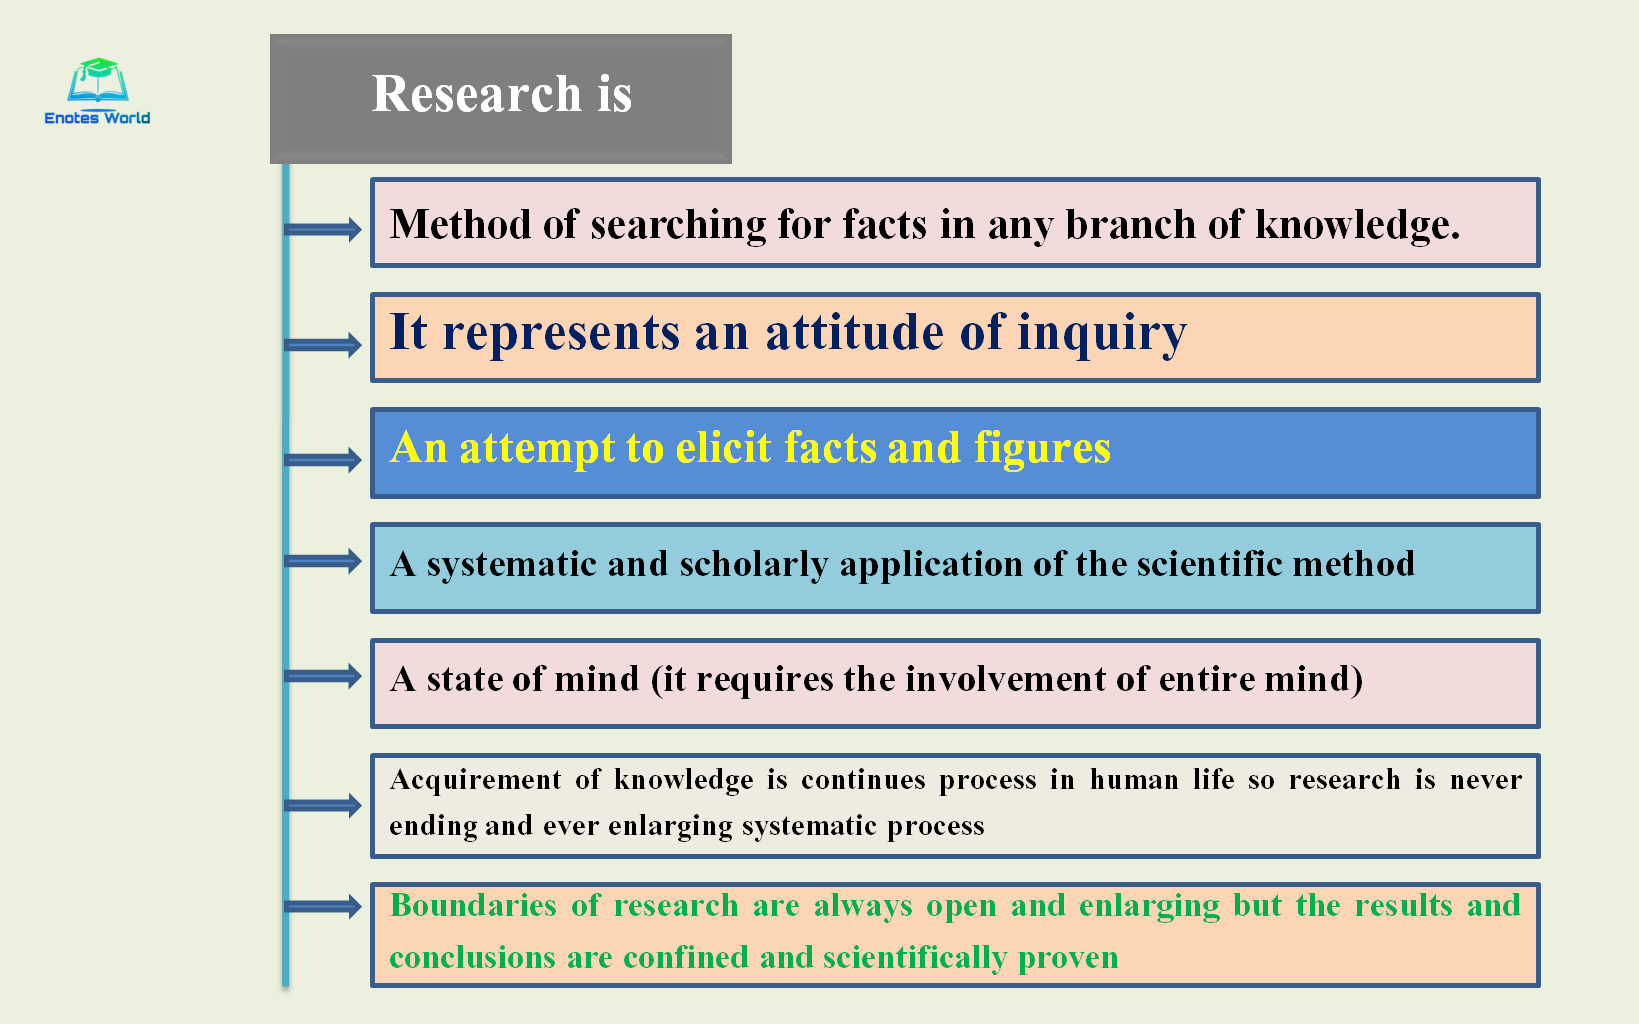 what are the features of a good research report